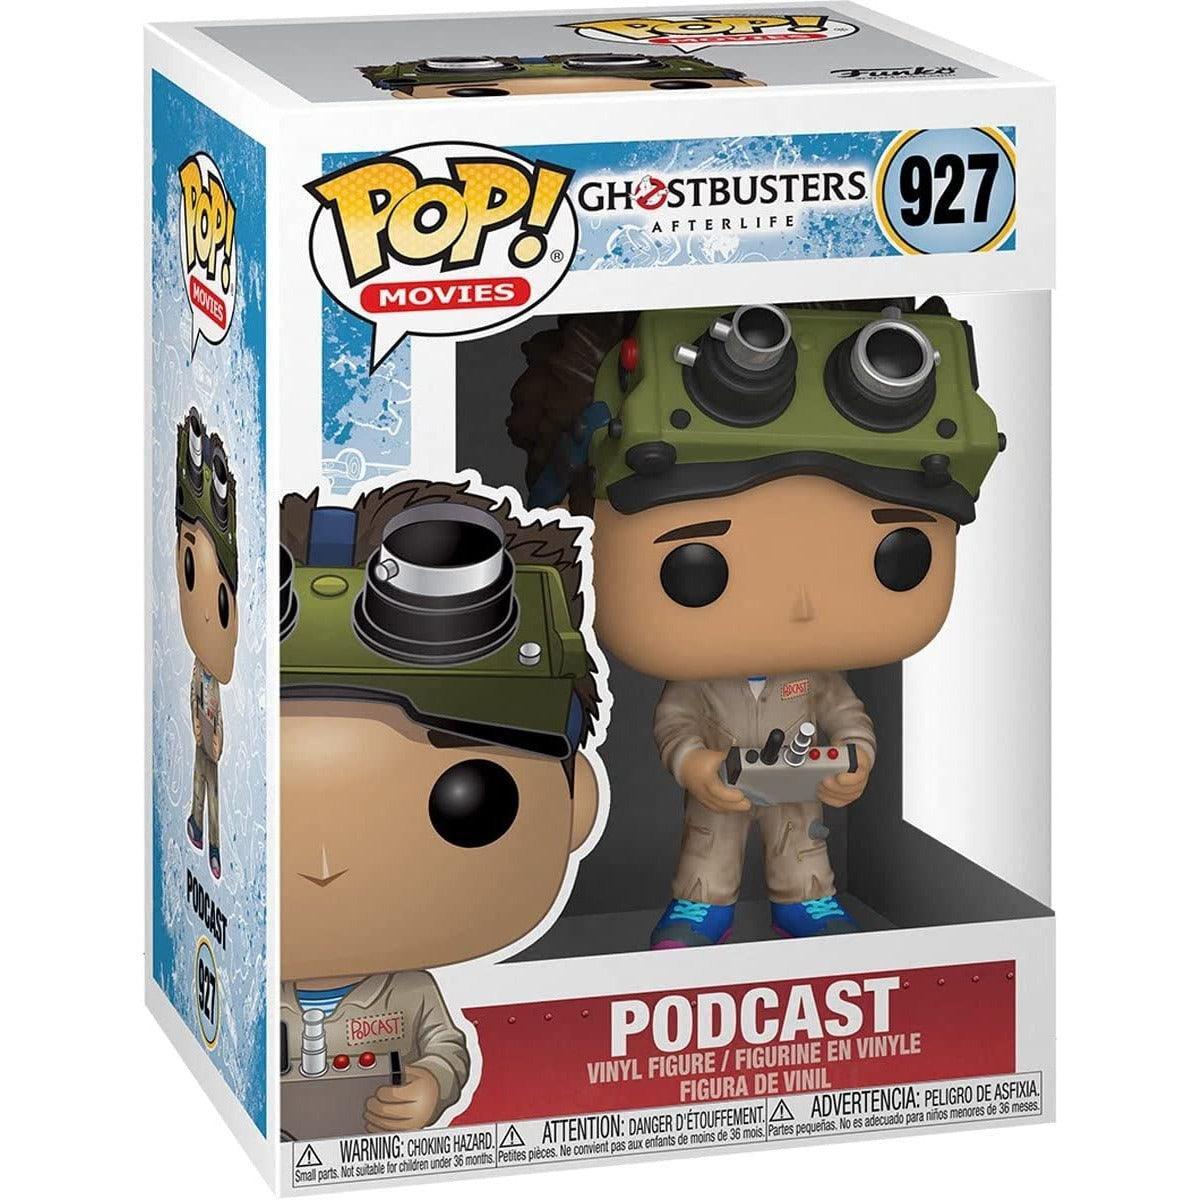 Funko Pop! Vinyl Figure: Ghostbusters - Slimer With Hot Ghostbusters Afterlife - Podcast - BumbleToys - 18+, 4+ Years, 5-7 Years, Action Figures, Boys, Dolls, Funko, Pre-Order